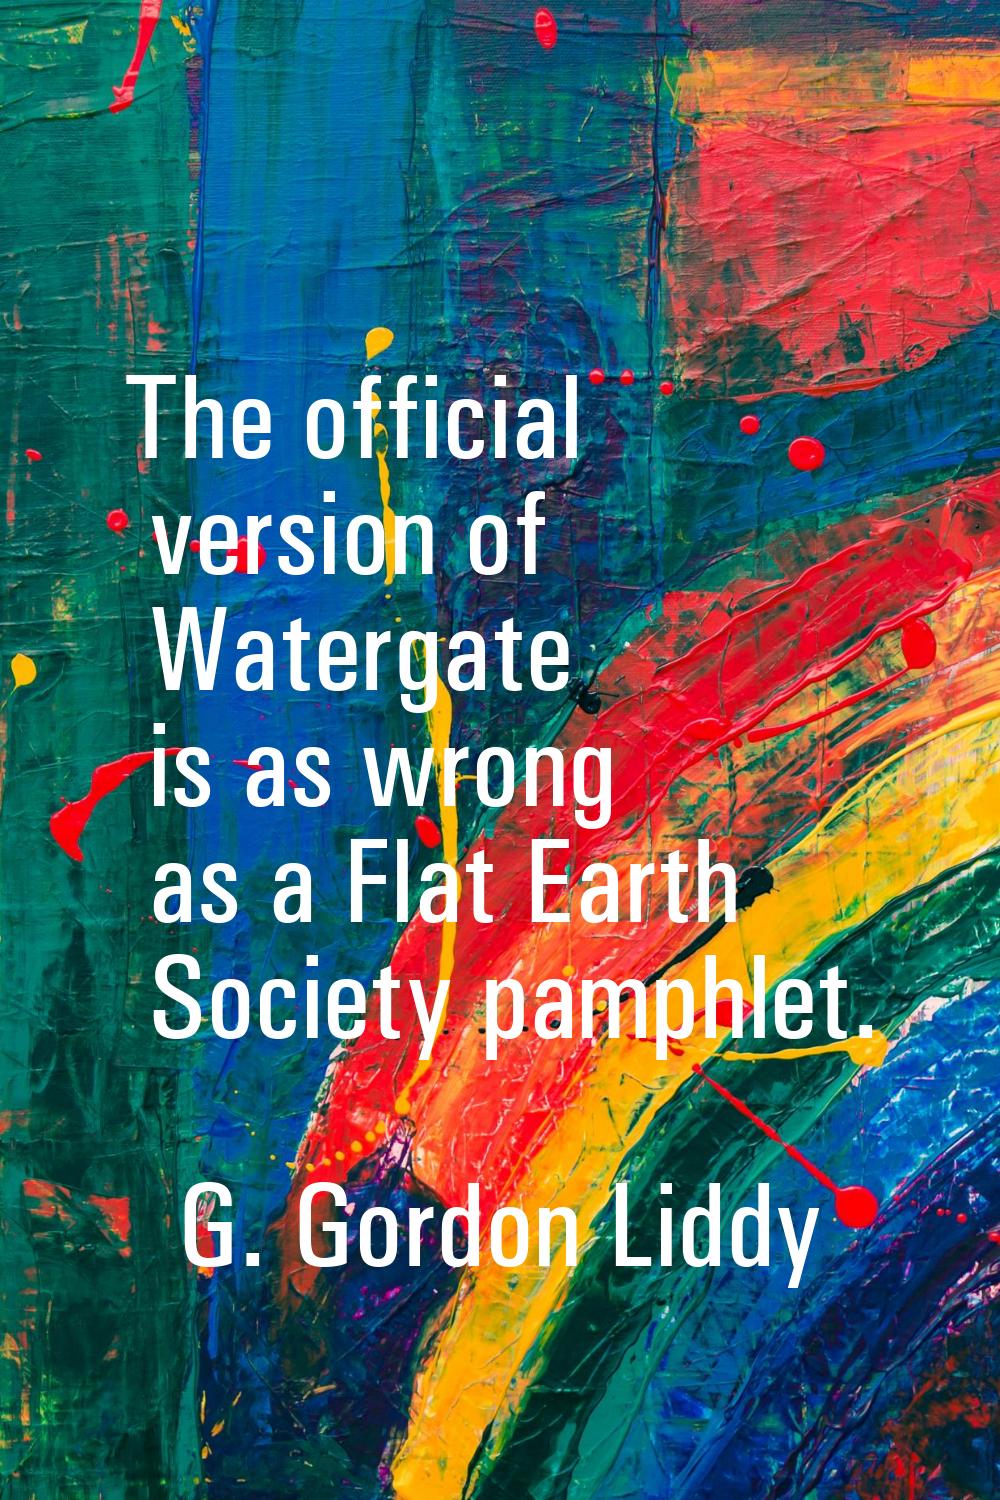 The official version of Watergate is as wrong as a Flat Earth Society pamphlet.